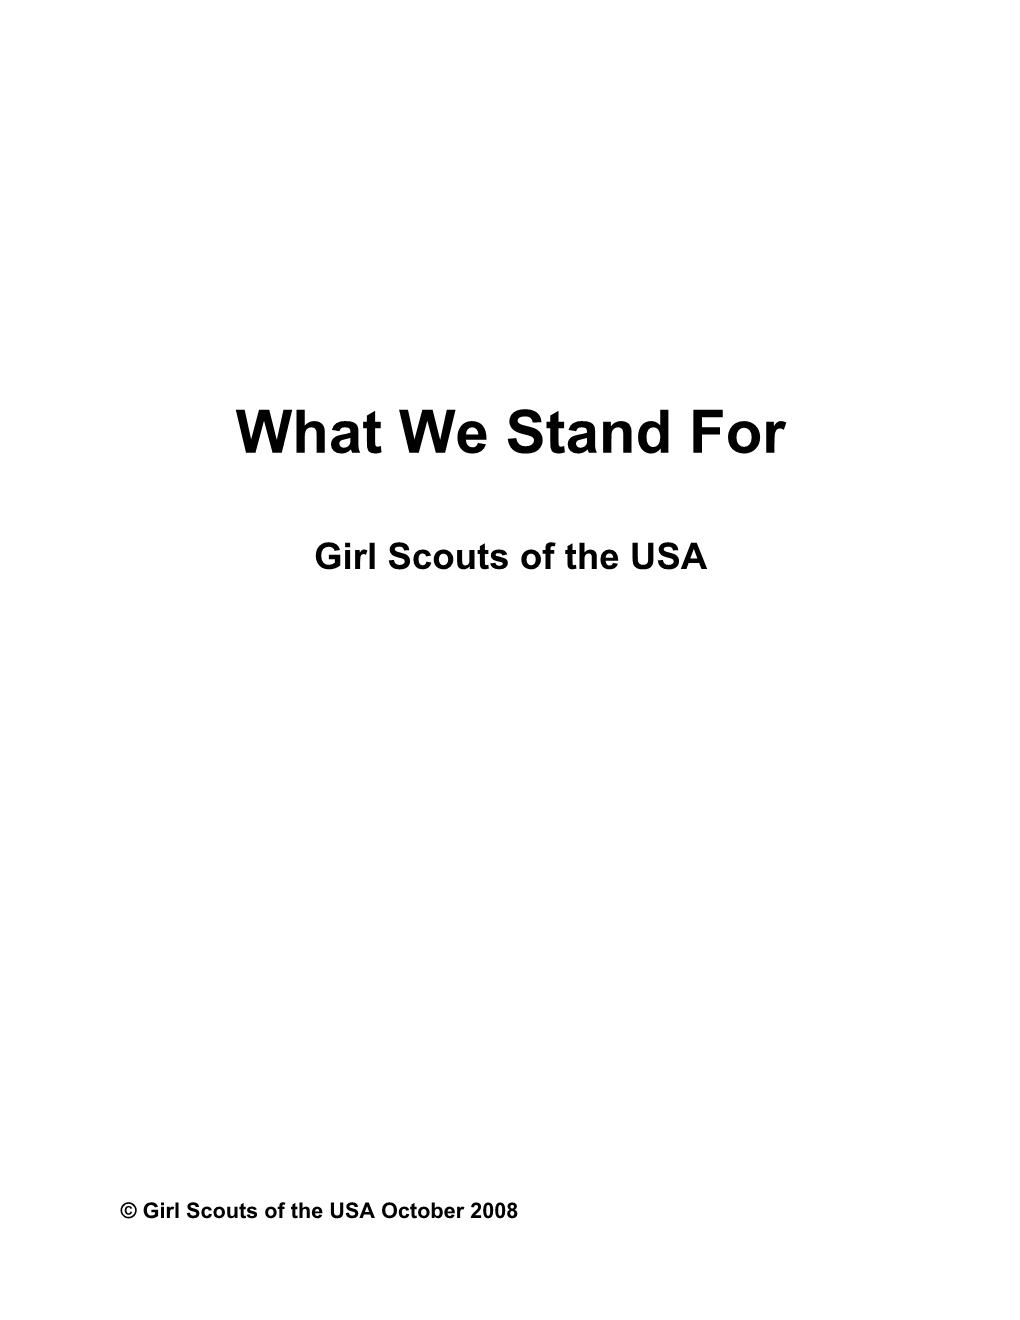 What We Stand for (Update)